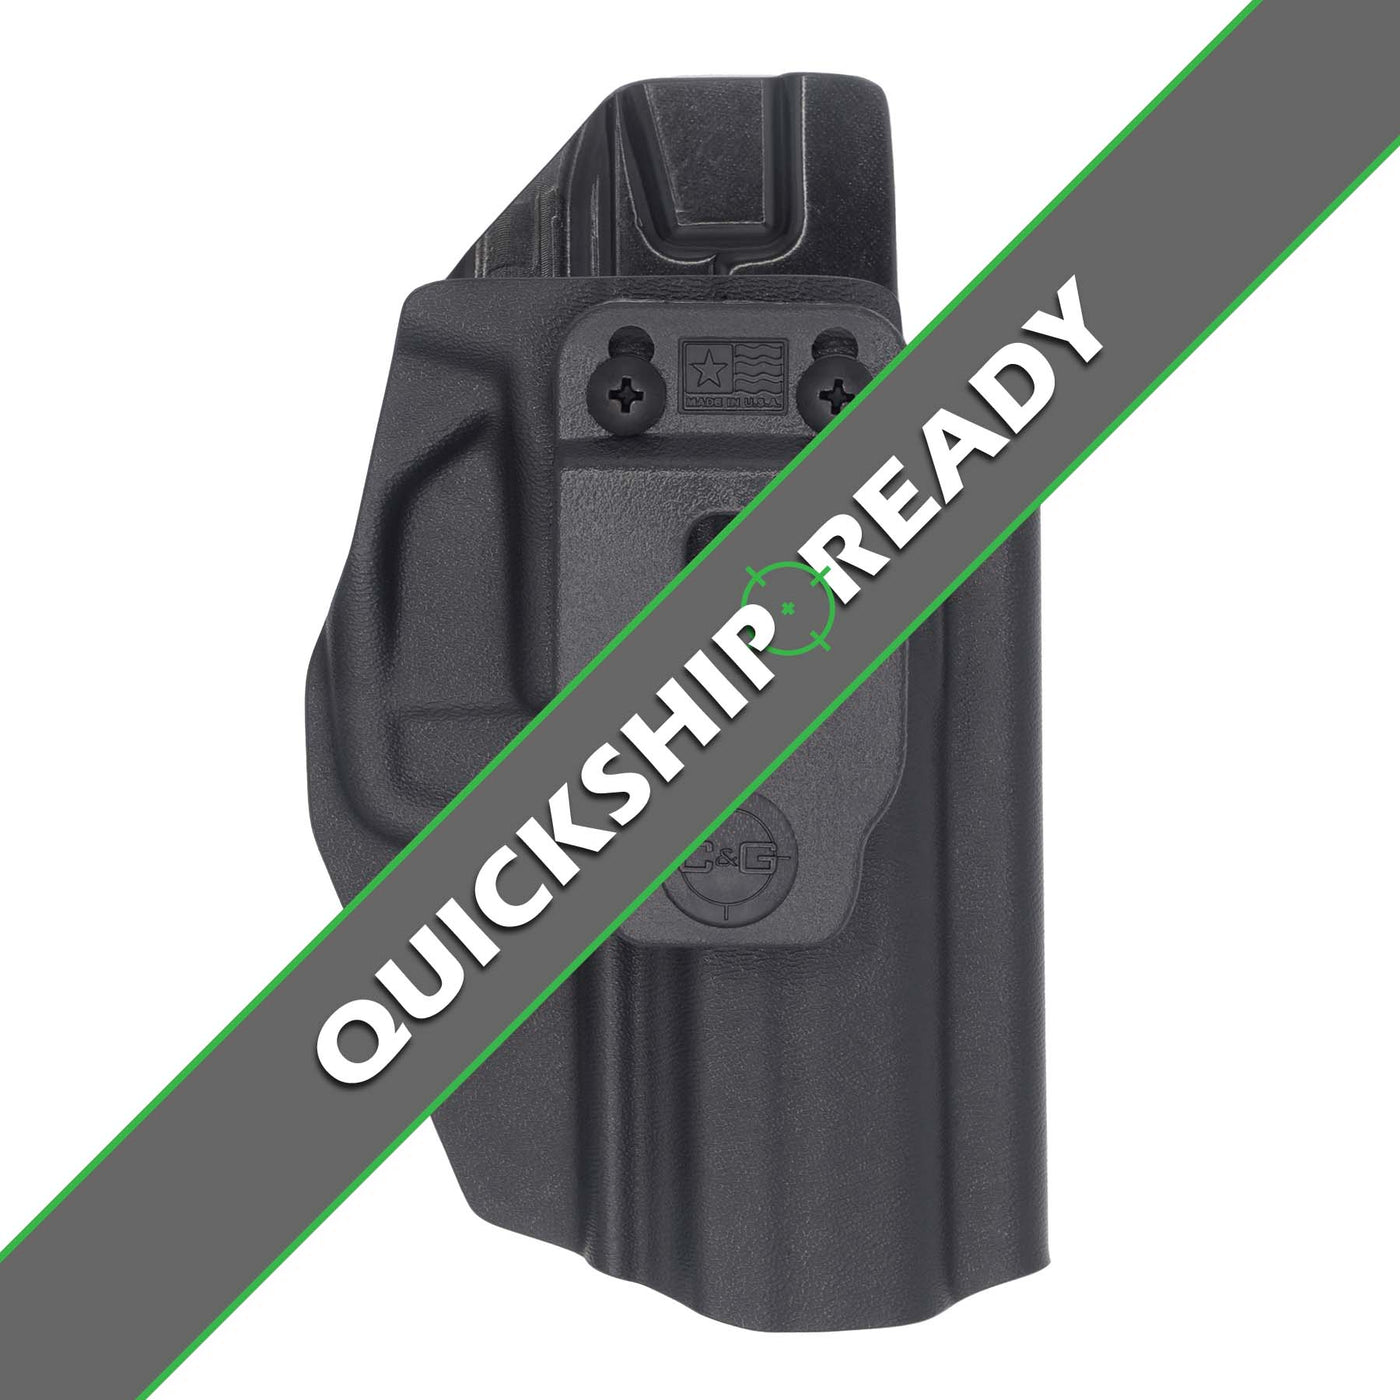 This is a quickship C&G Holsters IWB inside the waistband Holster for the Heckler and Koch HK45.